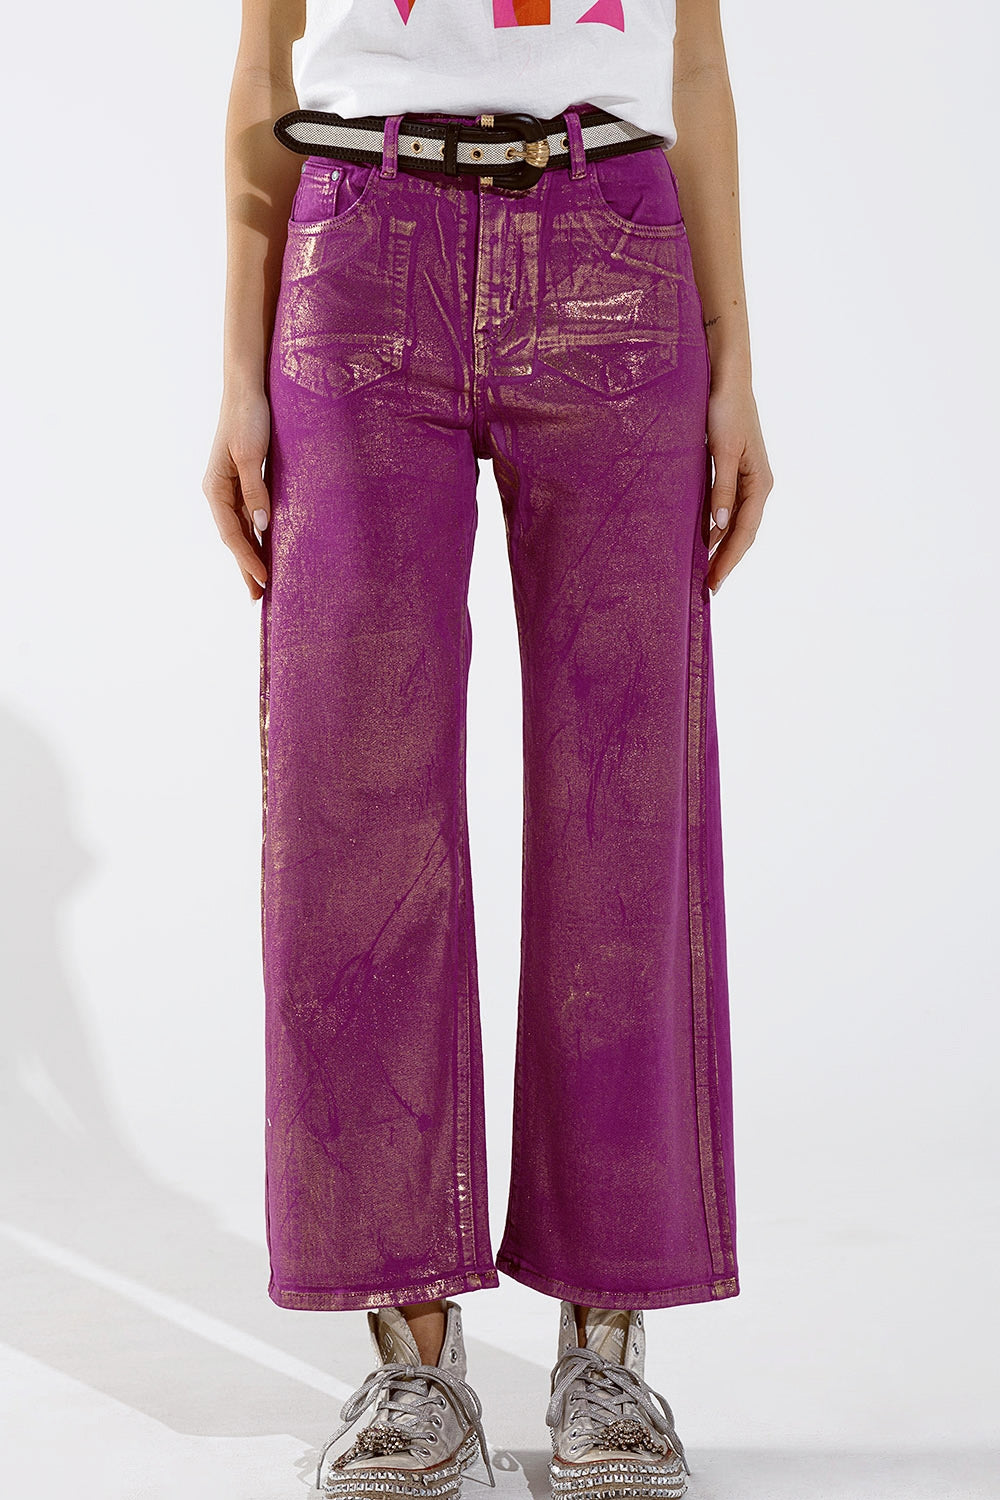 Q2 Magenta Wide Leg Jeans With Metallic Finish In Gold